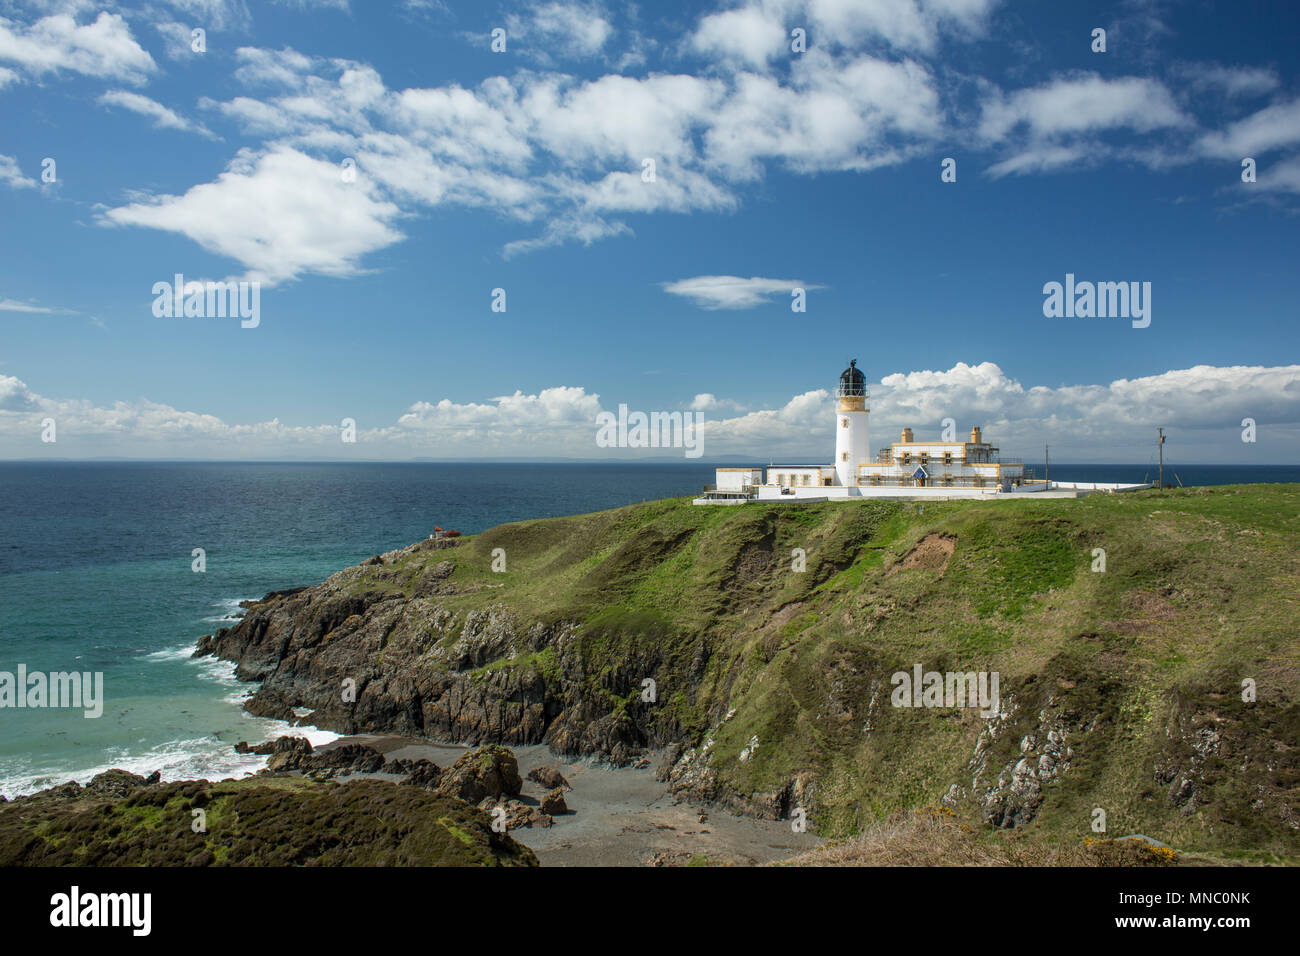 East Coast Of Ireland High Resolution Stock Photography and Images - Alamy